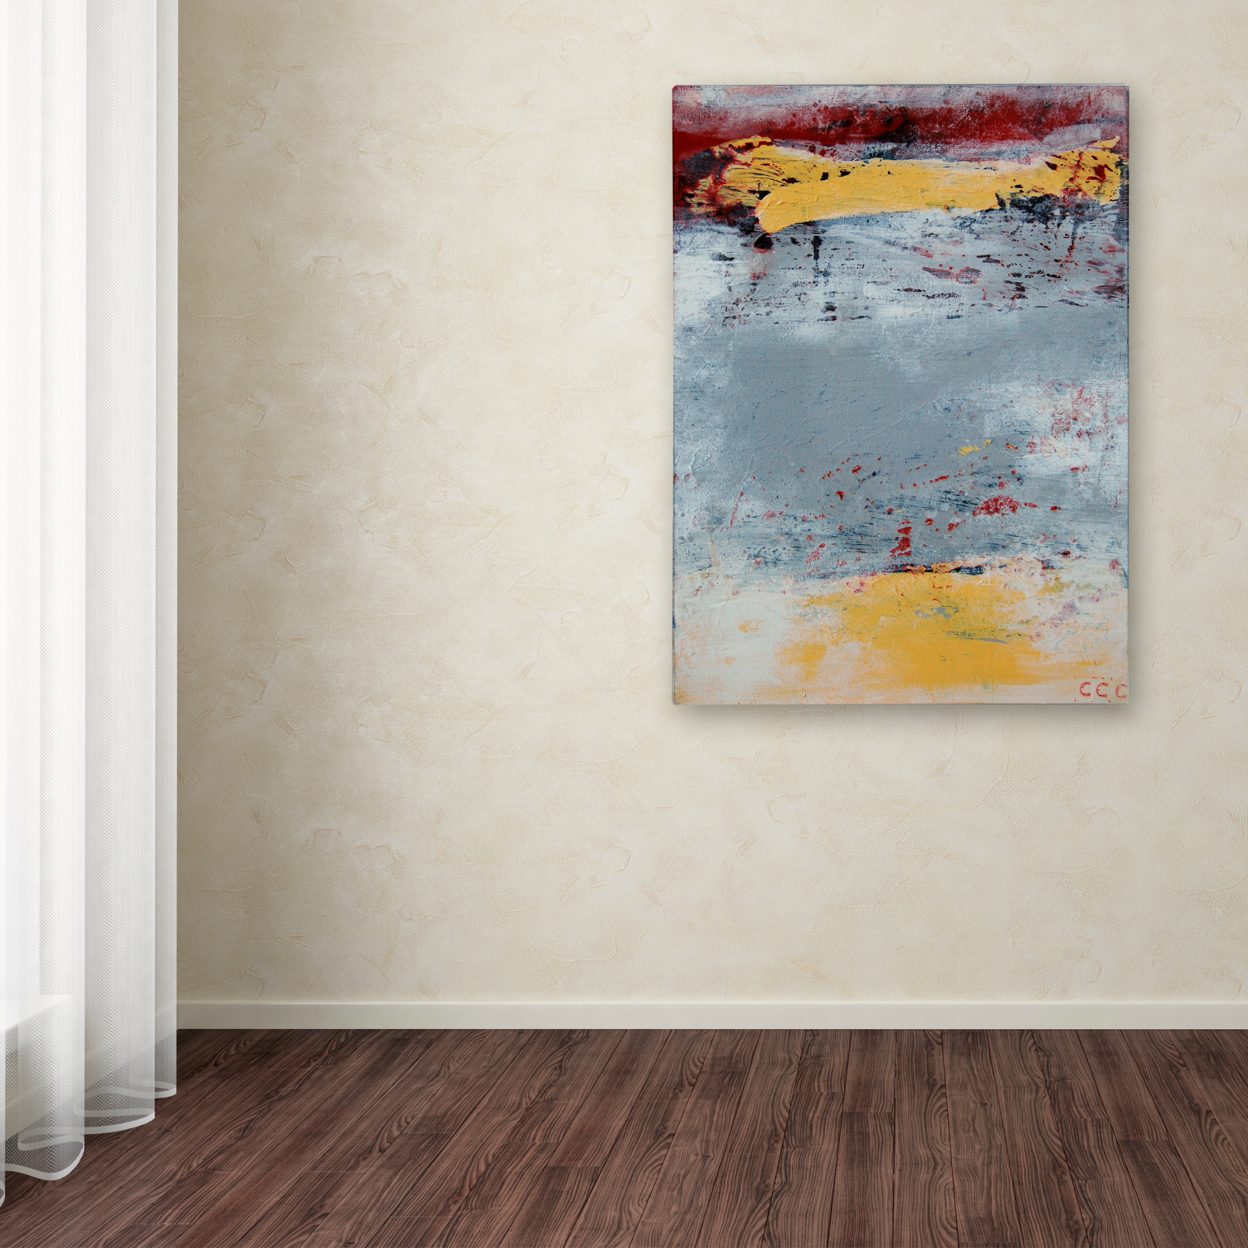 Nicole Dietz 'The Gray Yellow And Red One' Canvas Wall Art 35 X 47 Inches